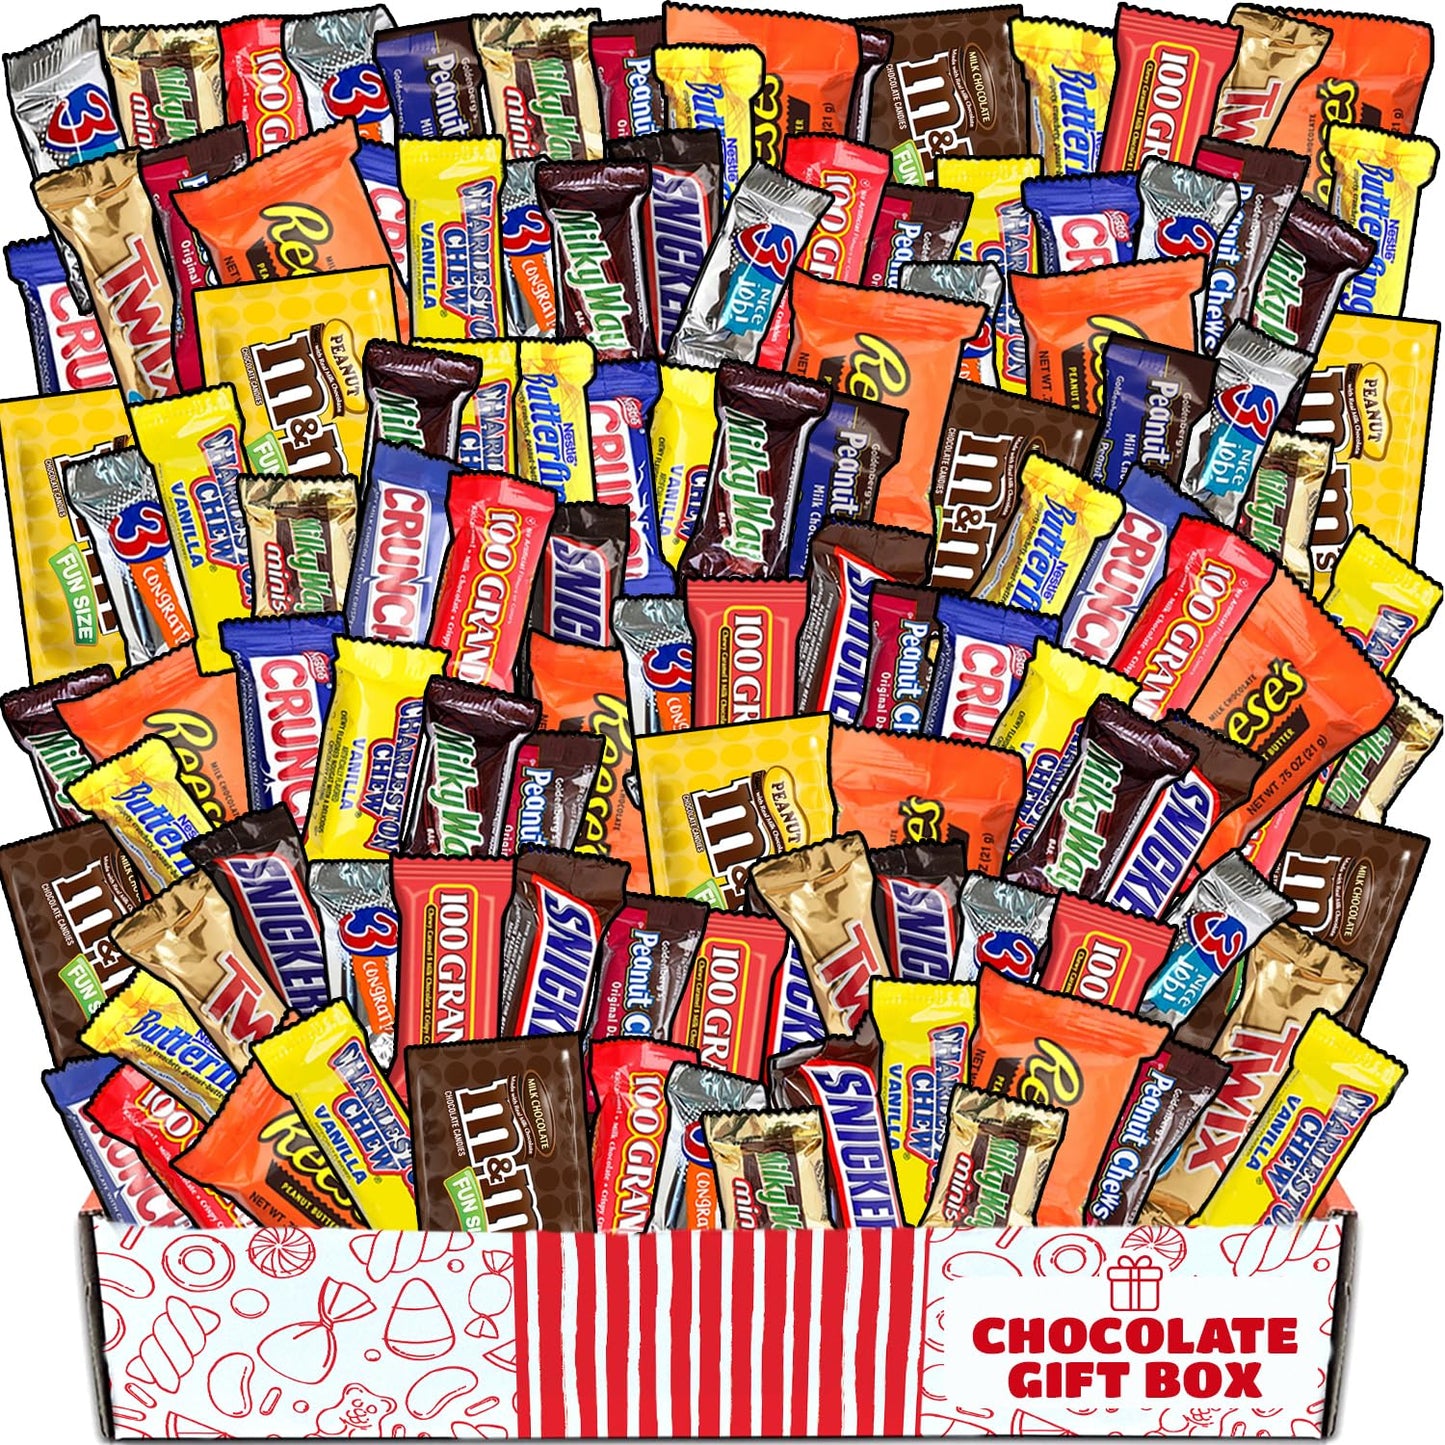 Chocolate Gift Basket - Chocolate Candy Box Variety Pack - Chocolate Care Package - Crave Box - Individually Wrapped Fun Size Candy Bars